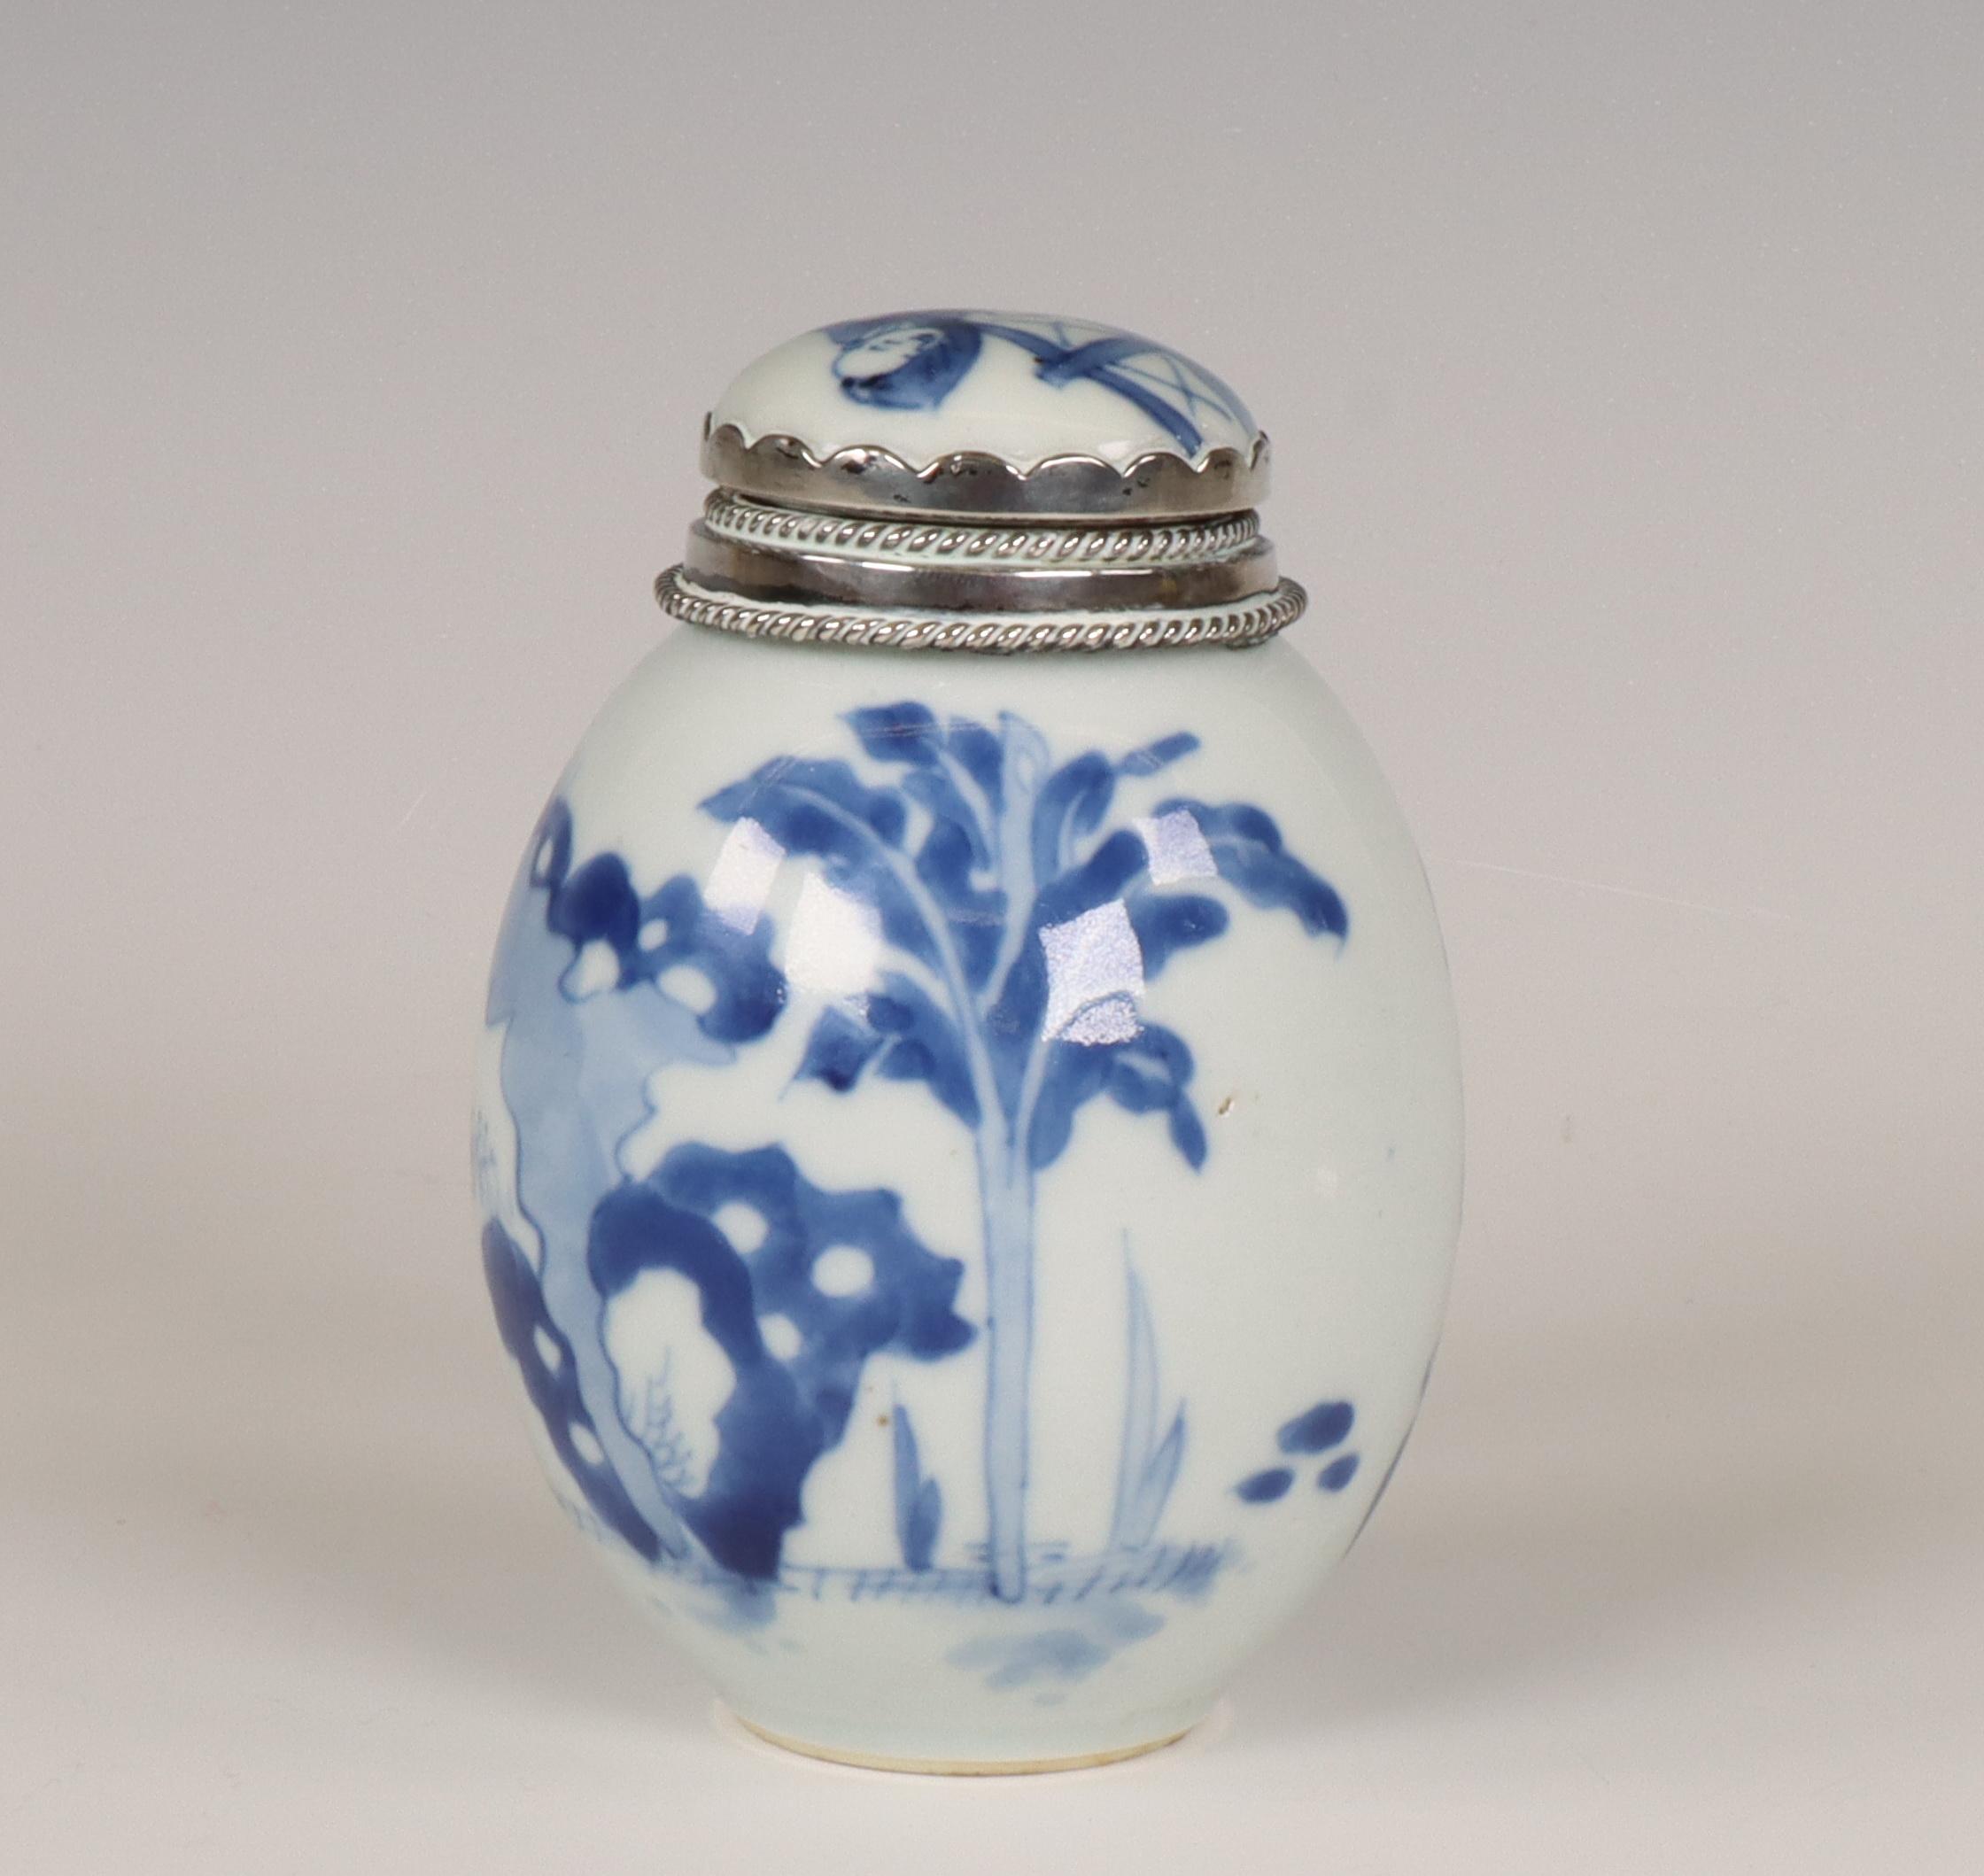 China, a silver-mounted blue and white porcelain oviform jar and cover, Kangxi period (1662-1722), t - Image 4 of 8